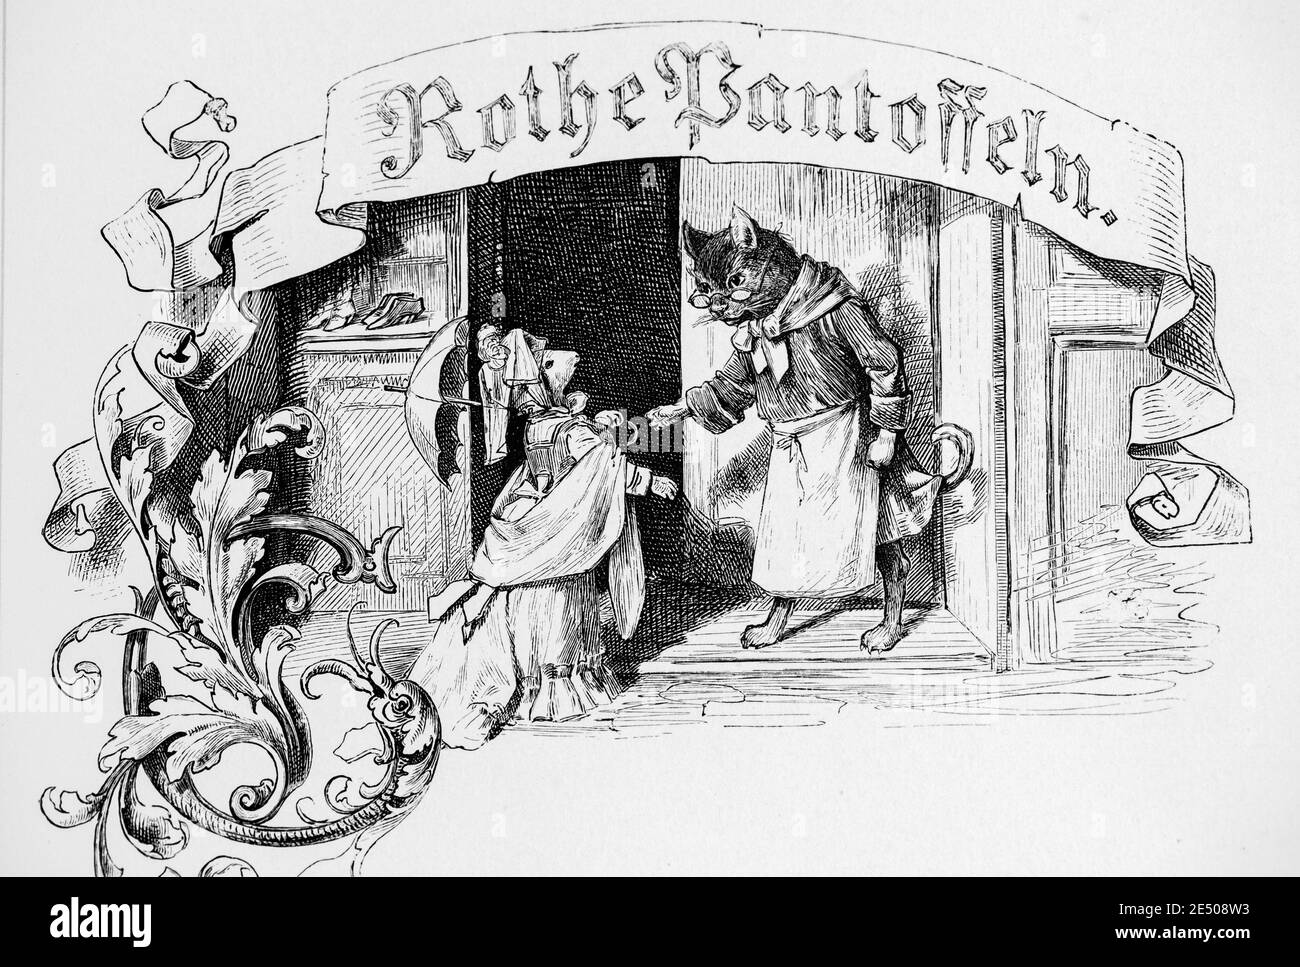 Illustration to Heine´s poem 'Rothe Pantoffeln'  or Red Slipper about a cat´s shoe shop and a customer mouse, poet Heinrich Heine, Romancero, 1880 Stock Photo